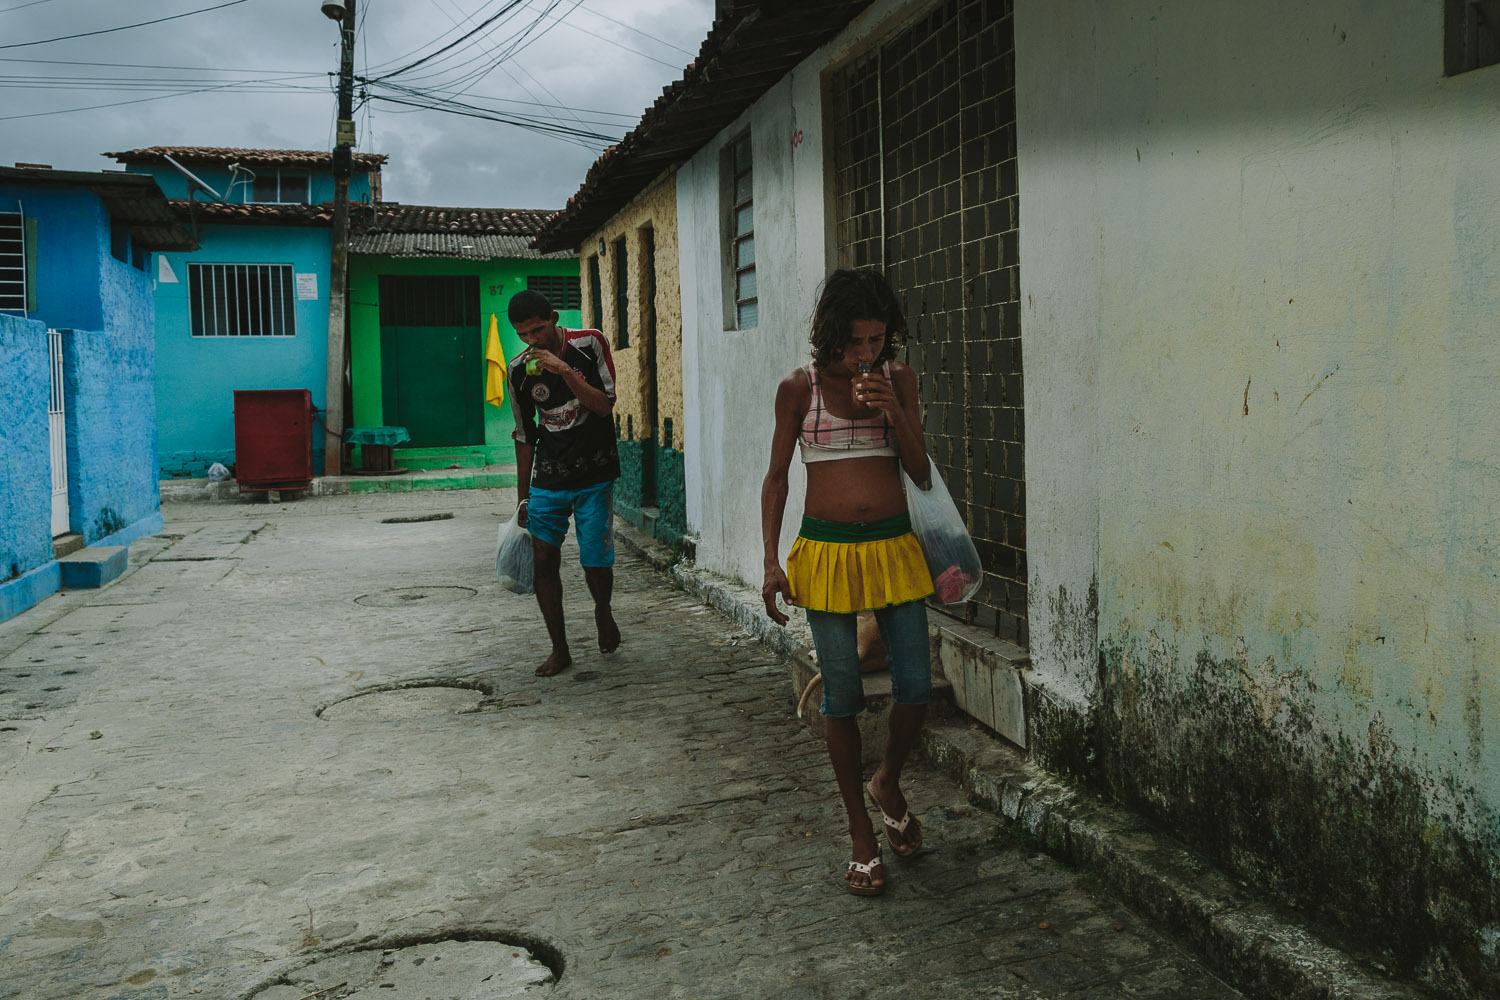   Sadly, people walking the streets strung out on drugs is a common sight in Emidio's neighborhood. The neighborhood where Emidio lives is a very very poor section of the city with substantial poverty and high crime rate. Many of the houses are nothi